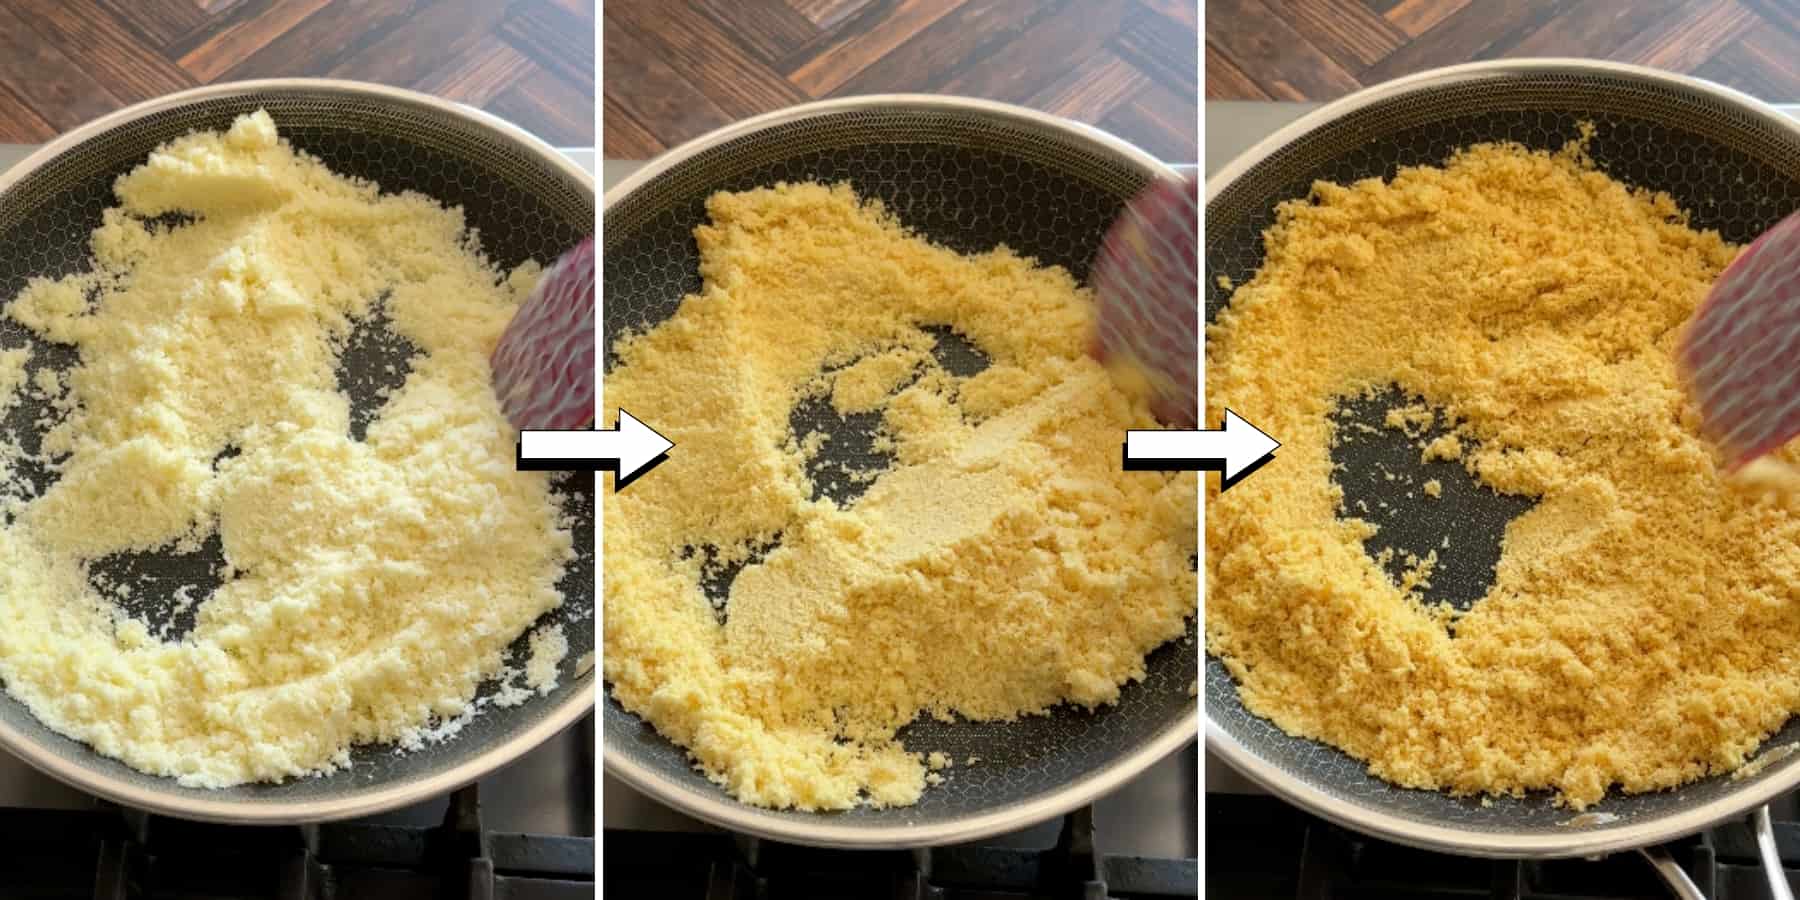 3-photo grid showing different stages of browning milk powder in a skillet